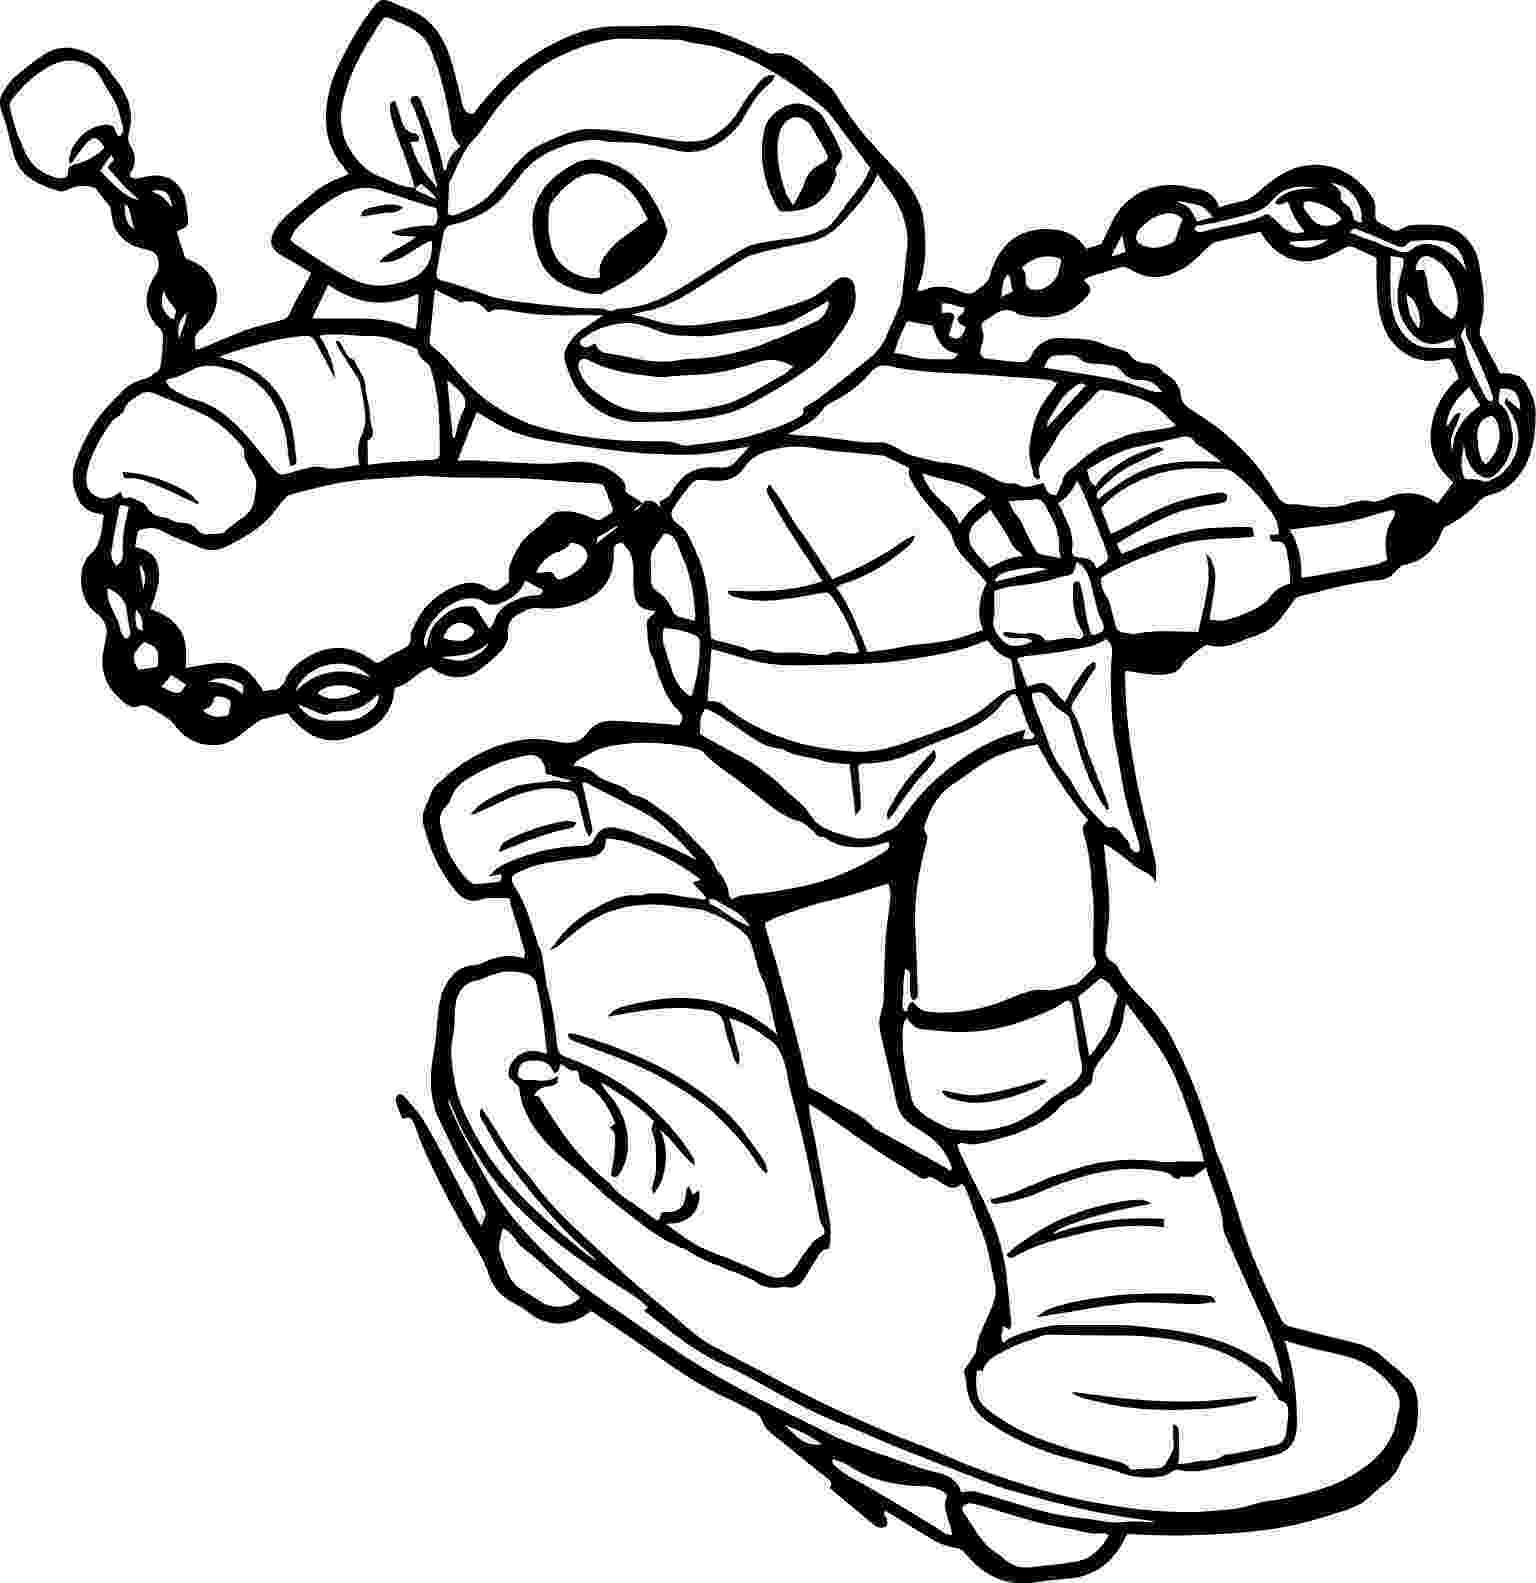 ninja turtles colouring pages ninja turtle coloring pages free printable pictures colouring pages turtles ninja 